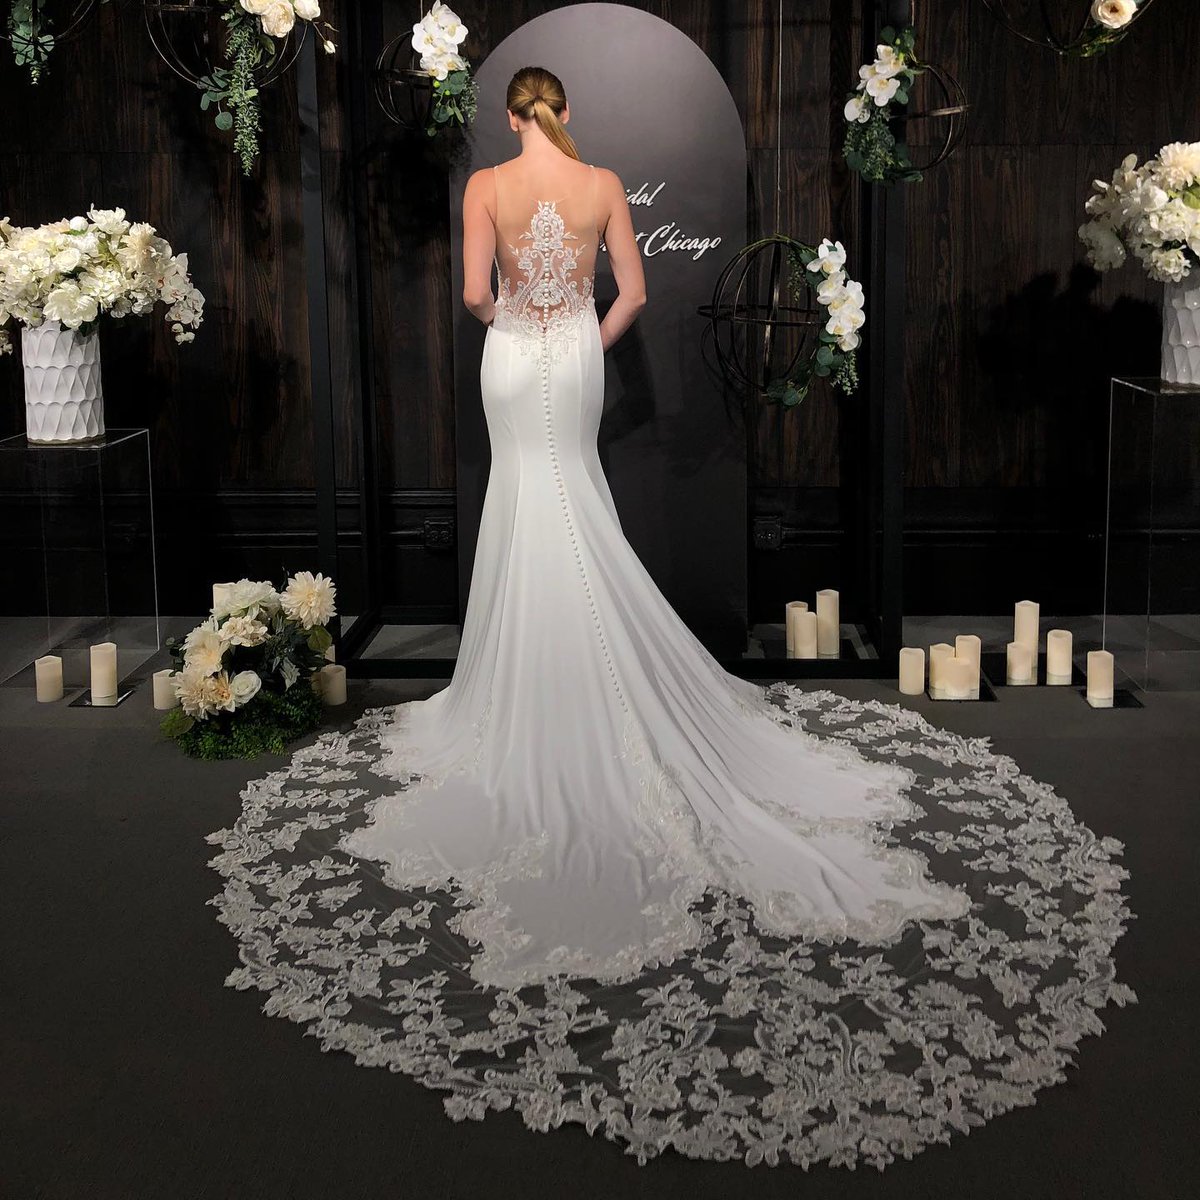 The details on our Fergie gown are breathtaking. The illusion lace on the back brings allure and a modern touch. Would you say yes to this dress? #wedding #bridetobe #bridal #weddingdress #style #fashion #bridalwear